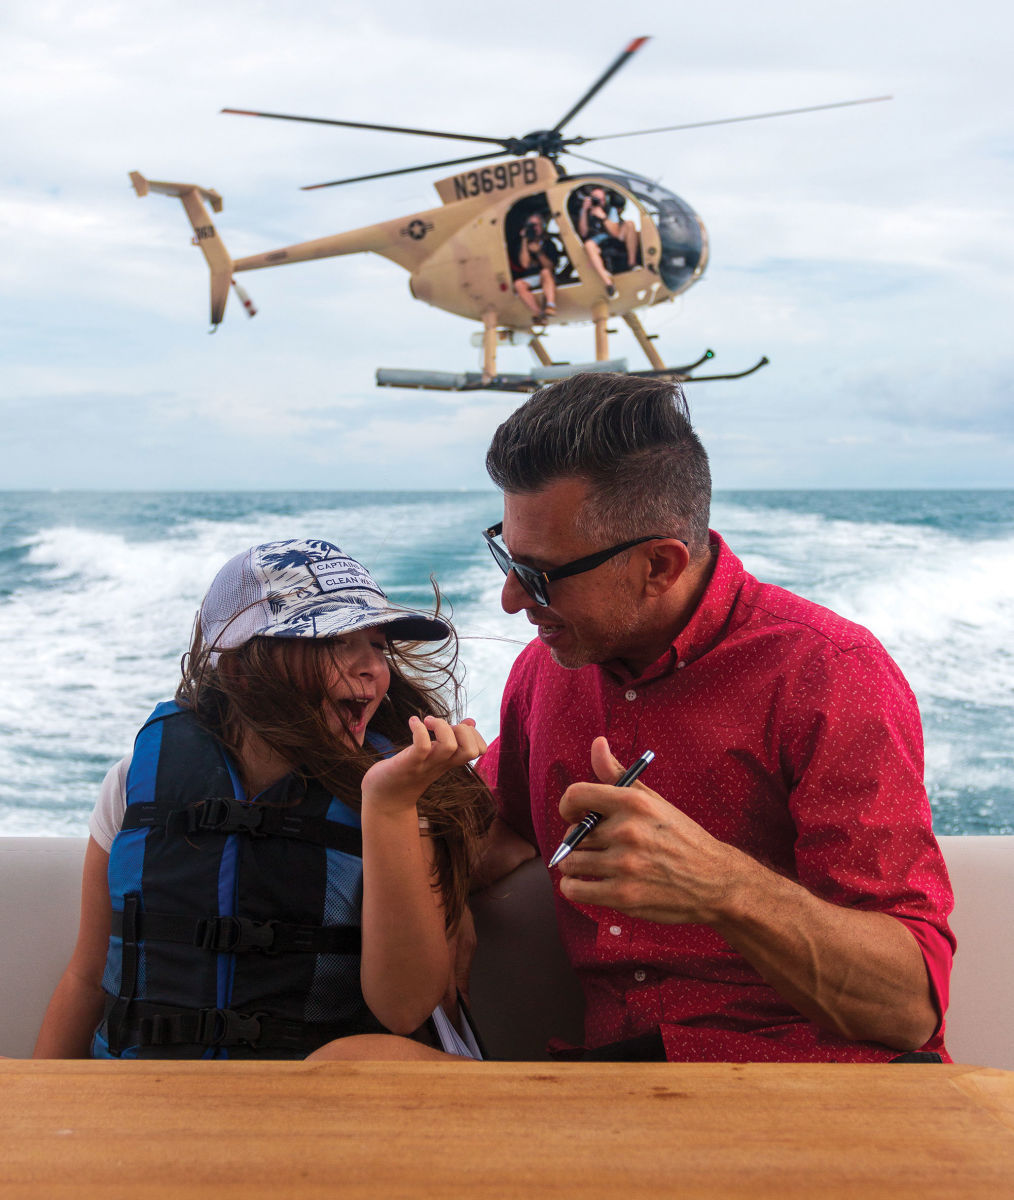 The author has been part of many helicopter shoots but this was by far his favorite, as he was able to share the experience with his daughter.